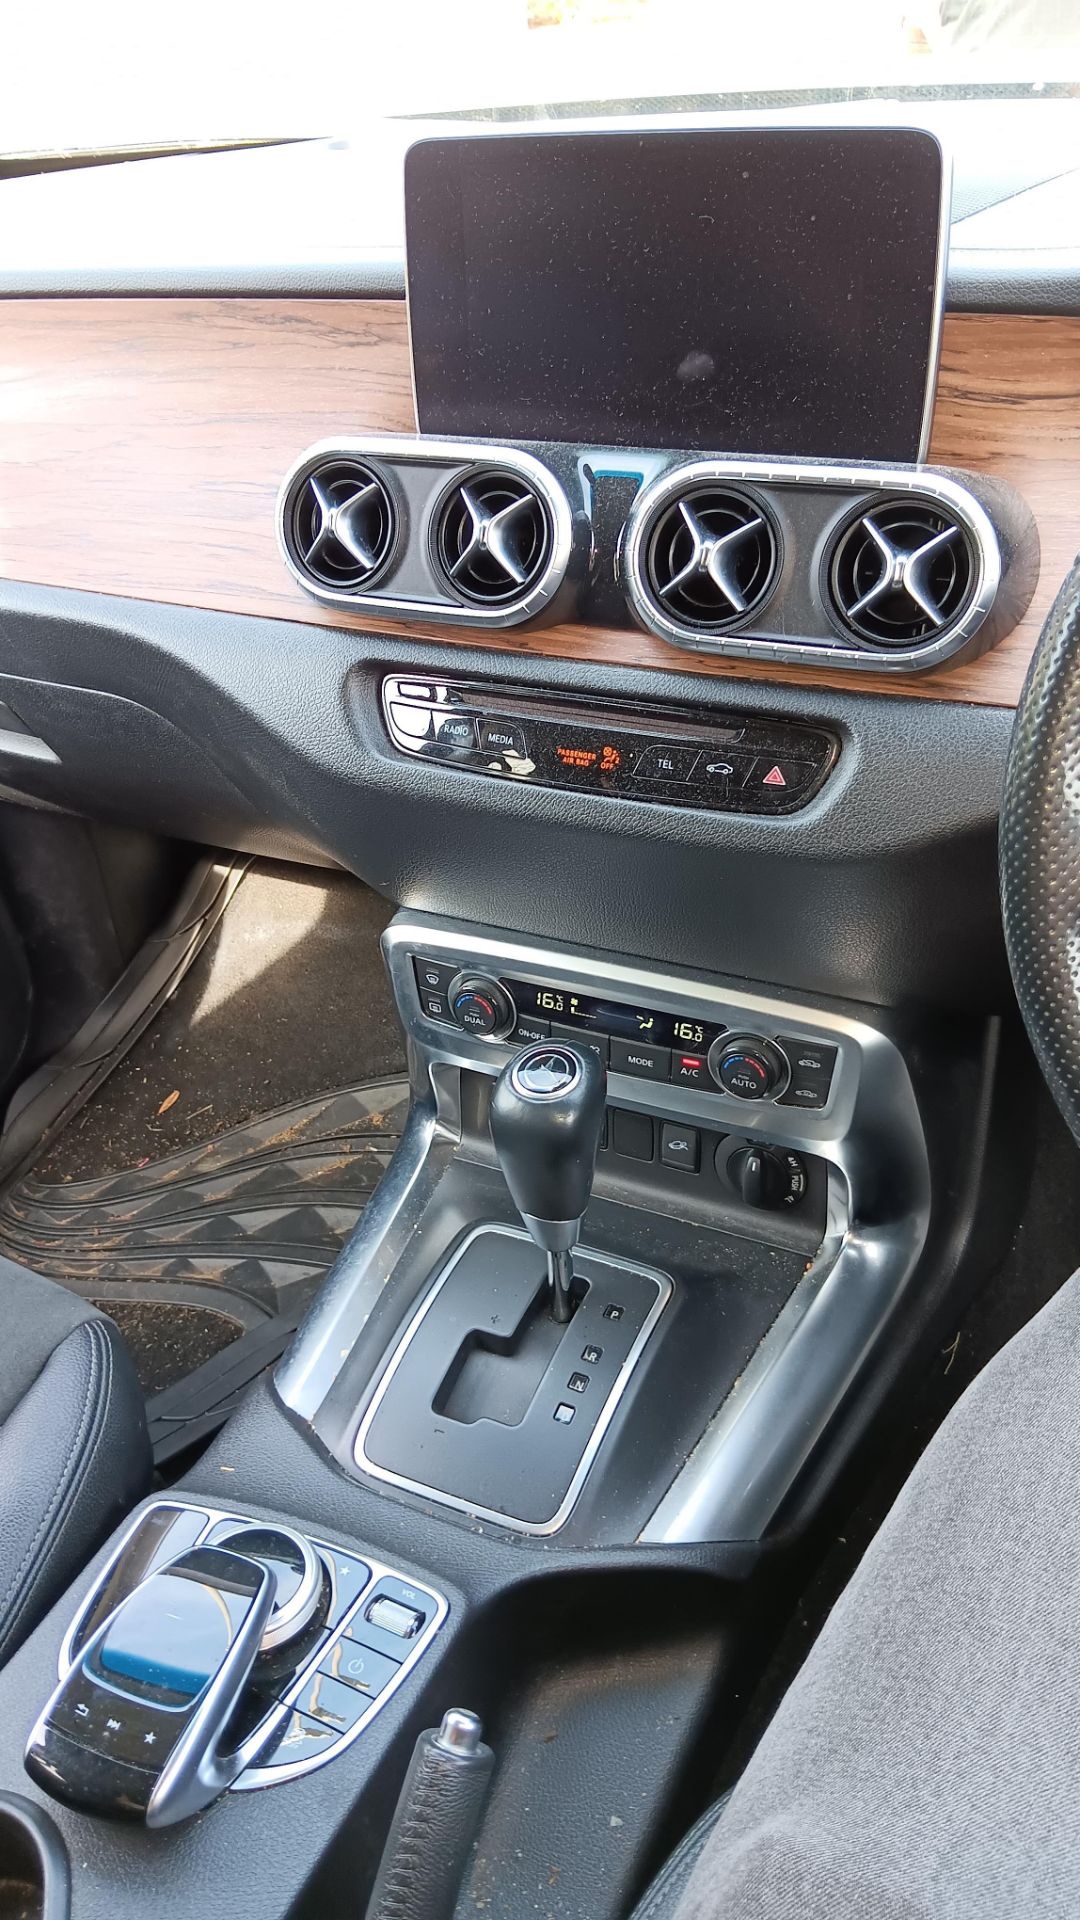 Mercedes-Benz X250 Power D 4Matic 7 speed Automatic Double Cab Pick-Up with fitted Alpha X-Class - Image 25 of 43